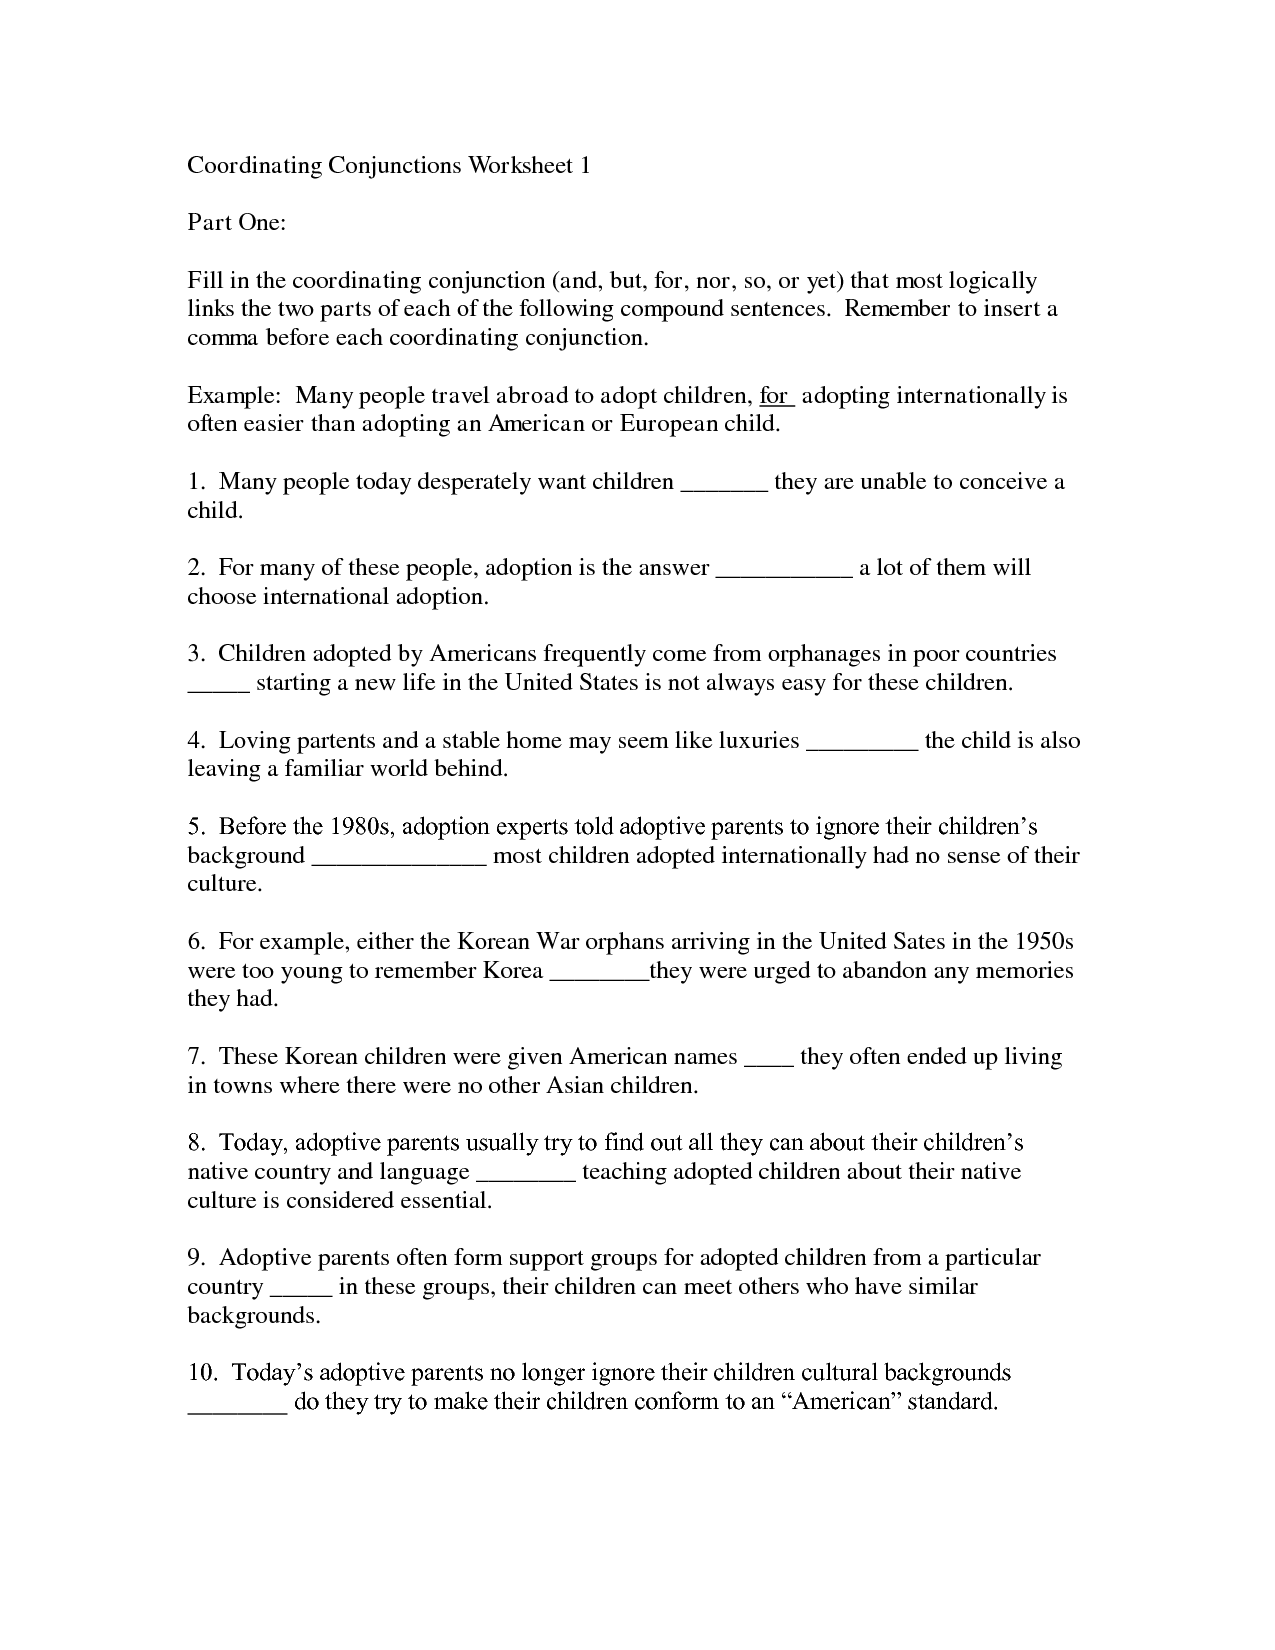 16-best-images-of-subordinating-conjunctions-with-commas-worksheets-coordinating-and